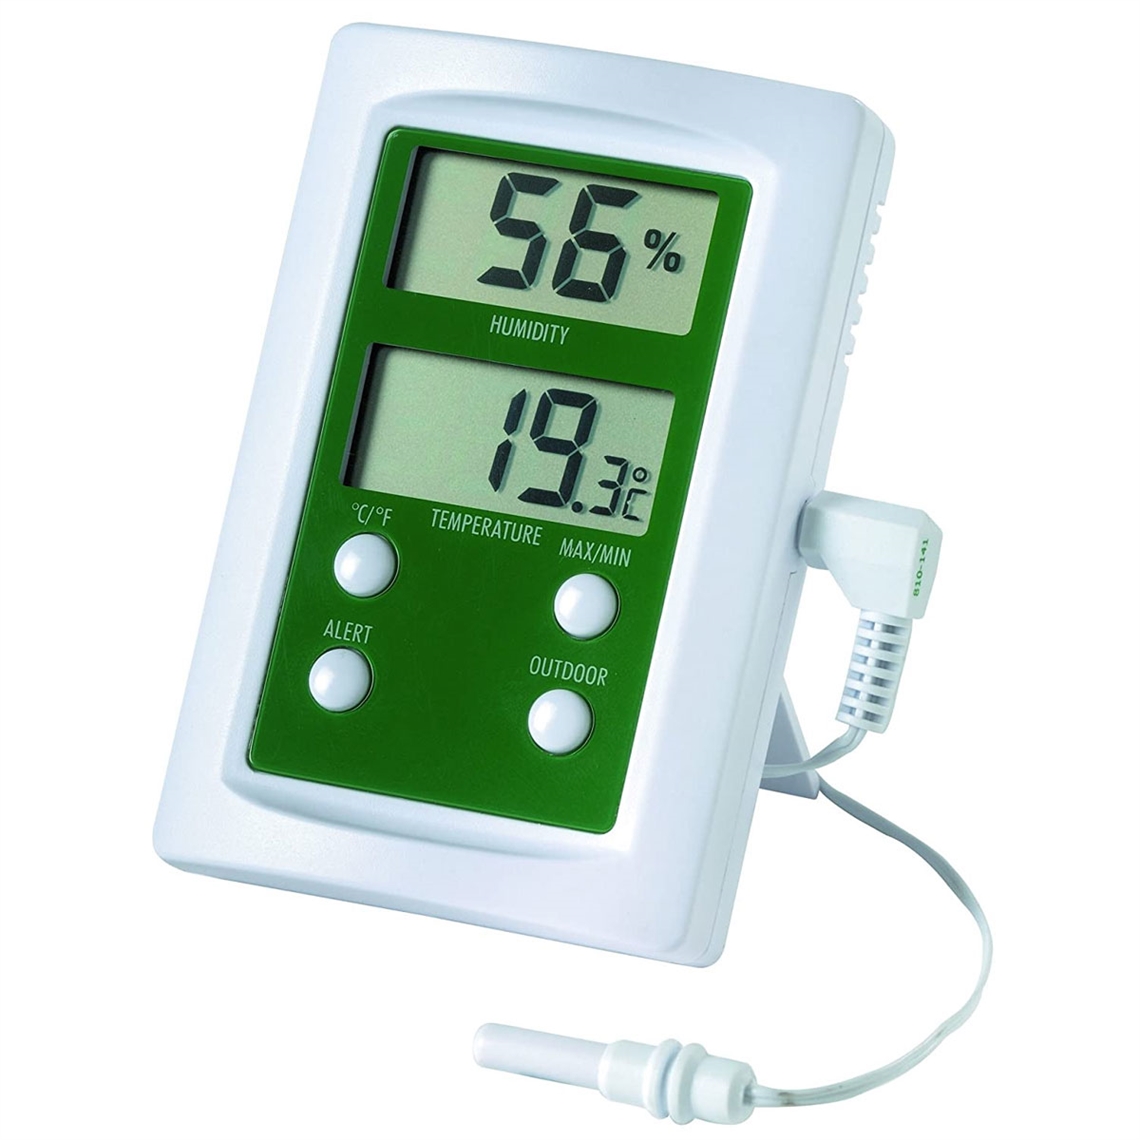 View more winemaster from our Thermo Hygrometers range